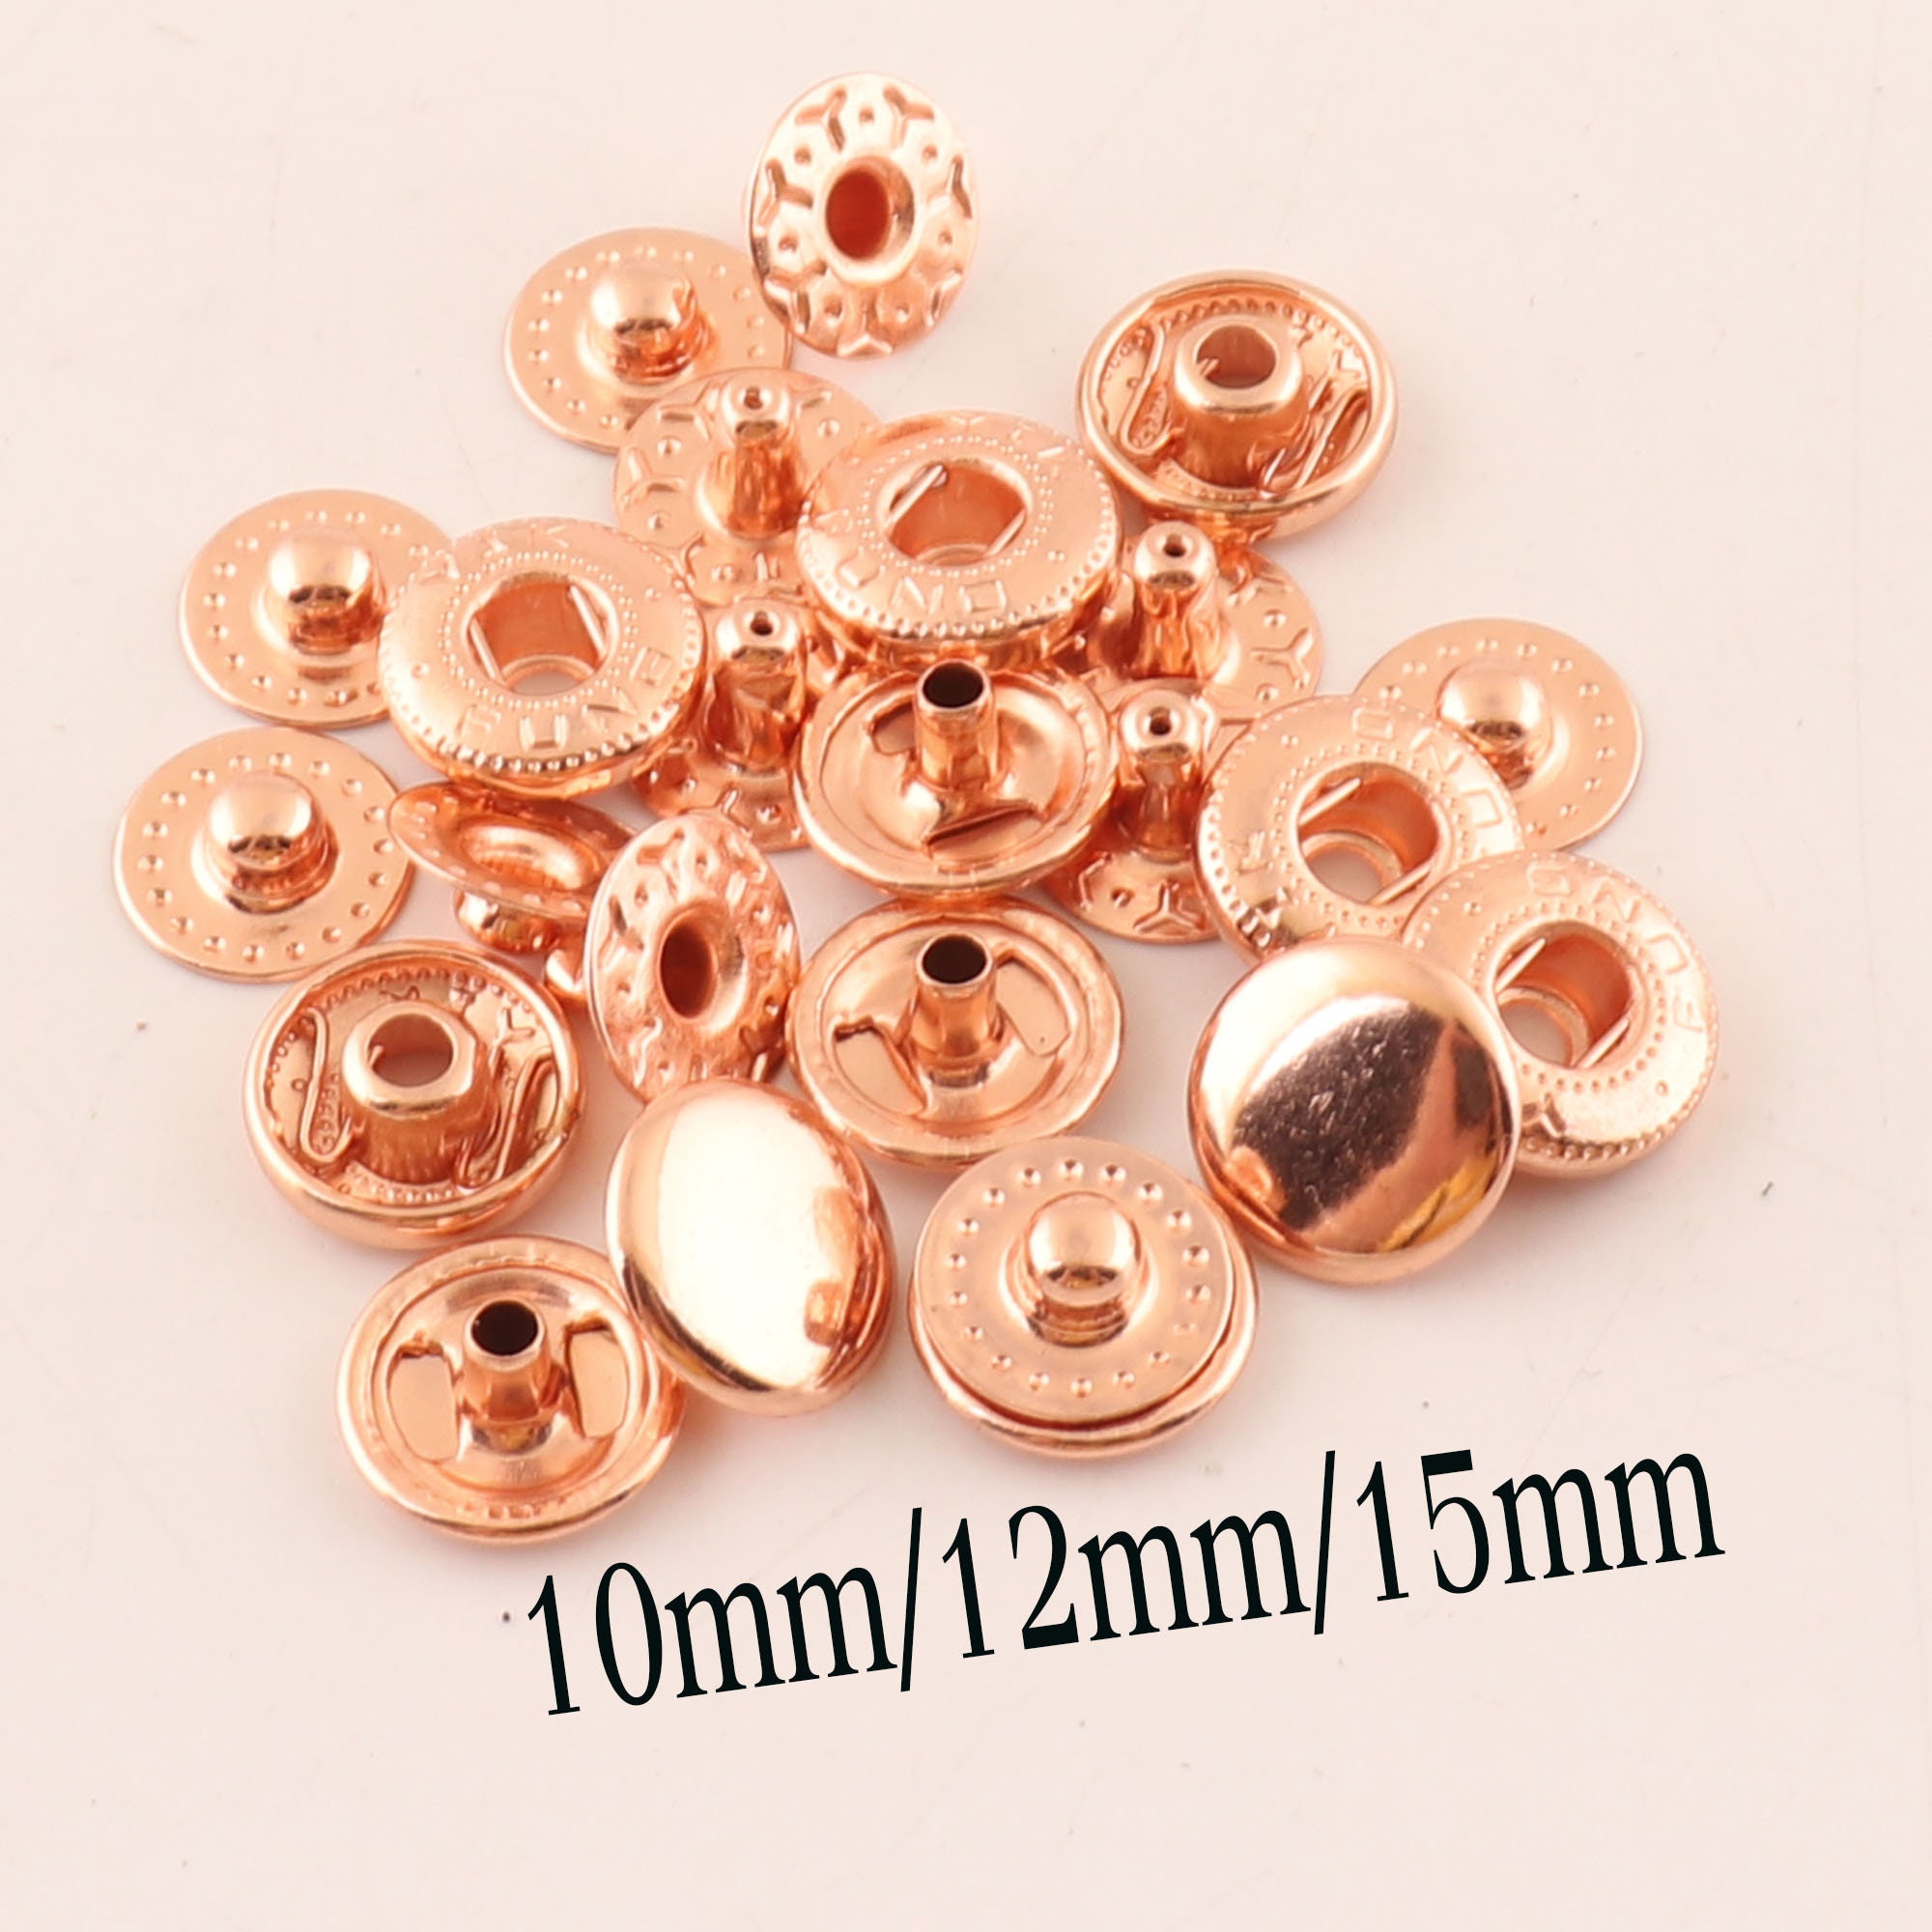 50 Sets of 50mm Metal Sew on Snap Buttons Snap Fastener Press Stud Sewing  Leather Craft Clothes Bags, 15mm 